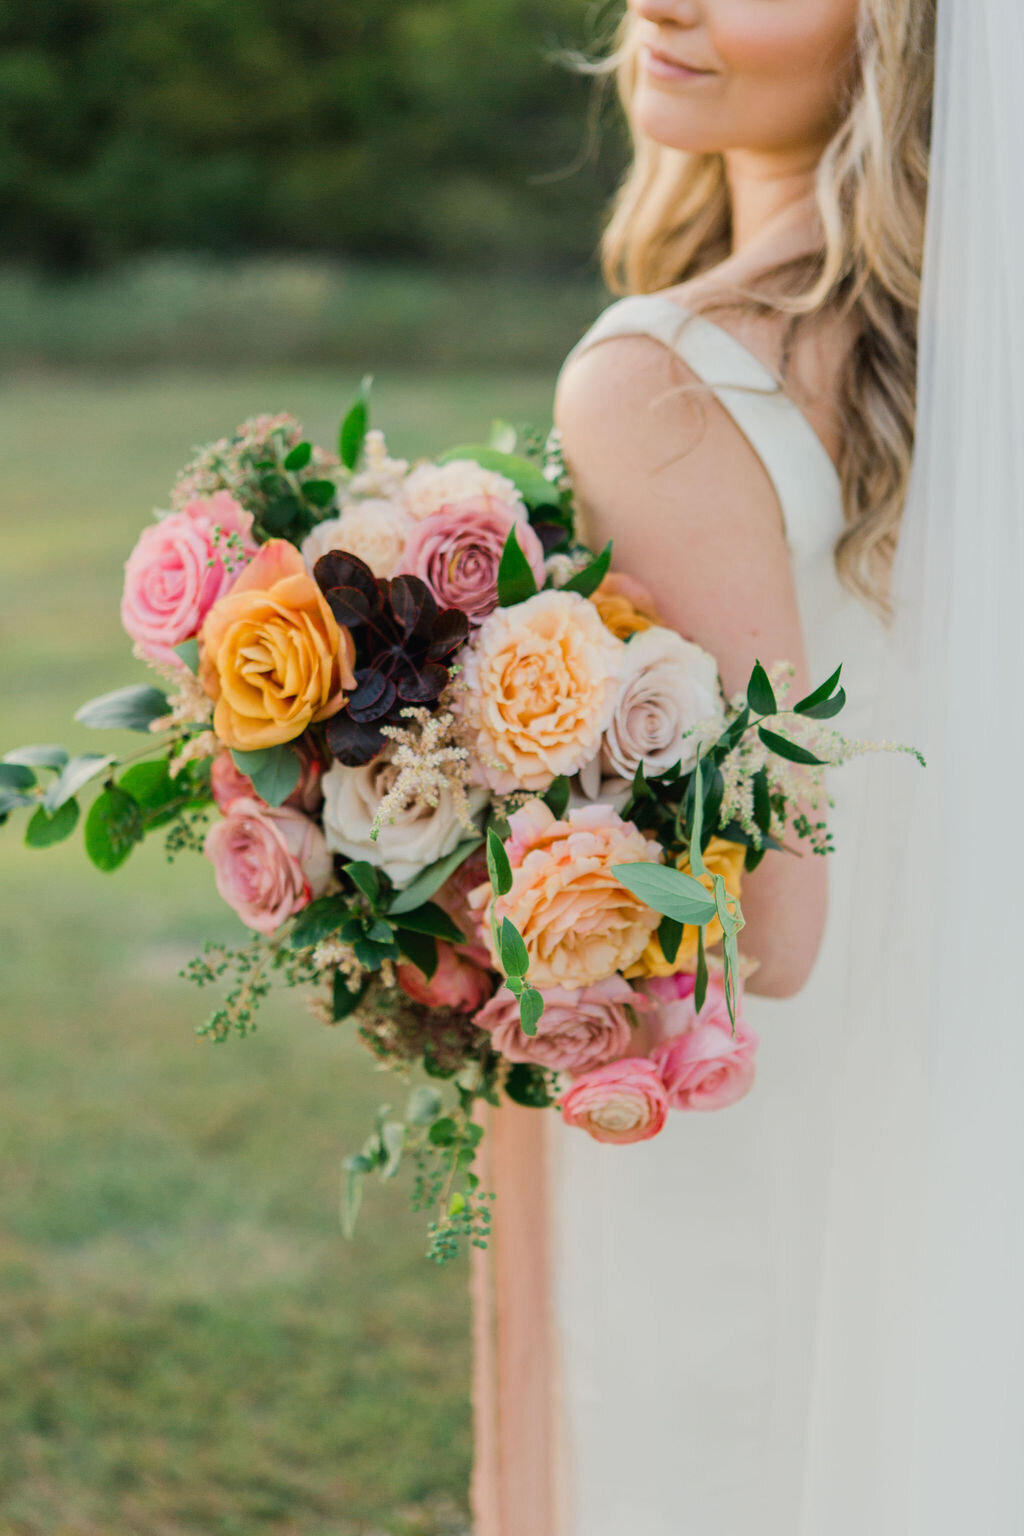 Pink and lush bridal bouquet by Vella Nest Floral Design, Best Florist in Dallas, Texas